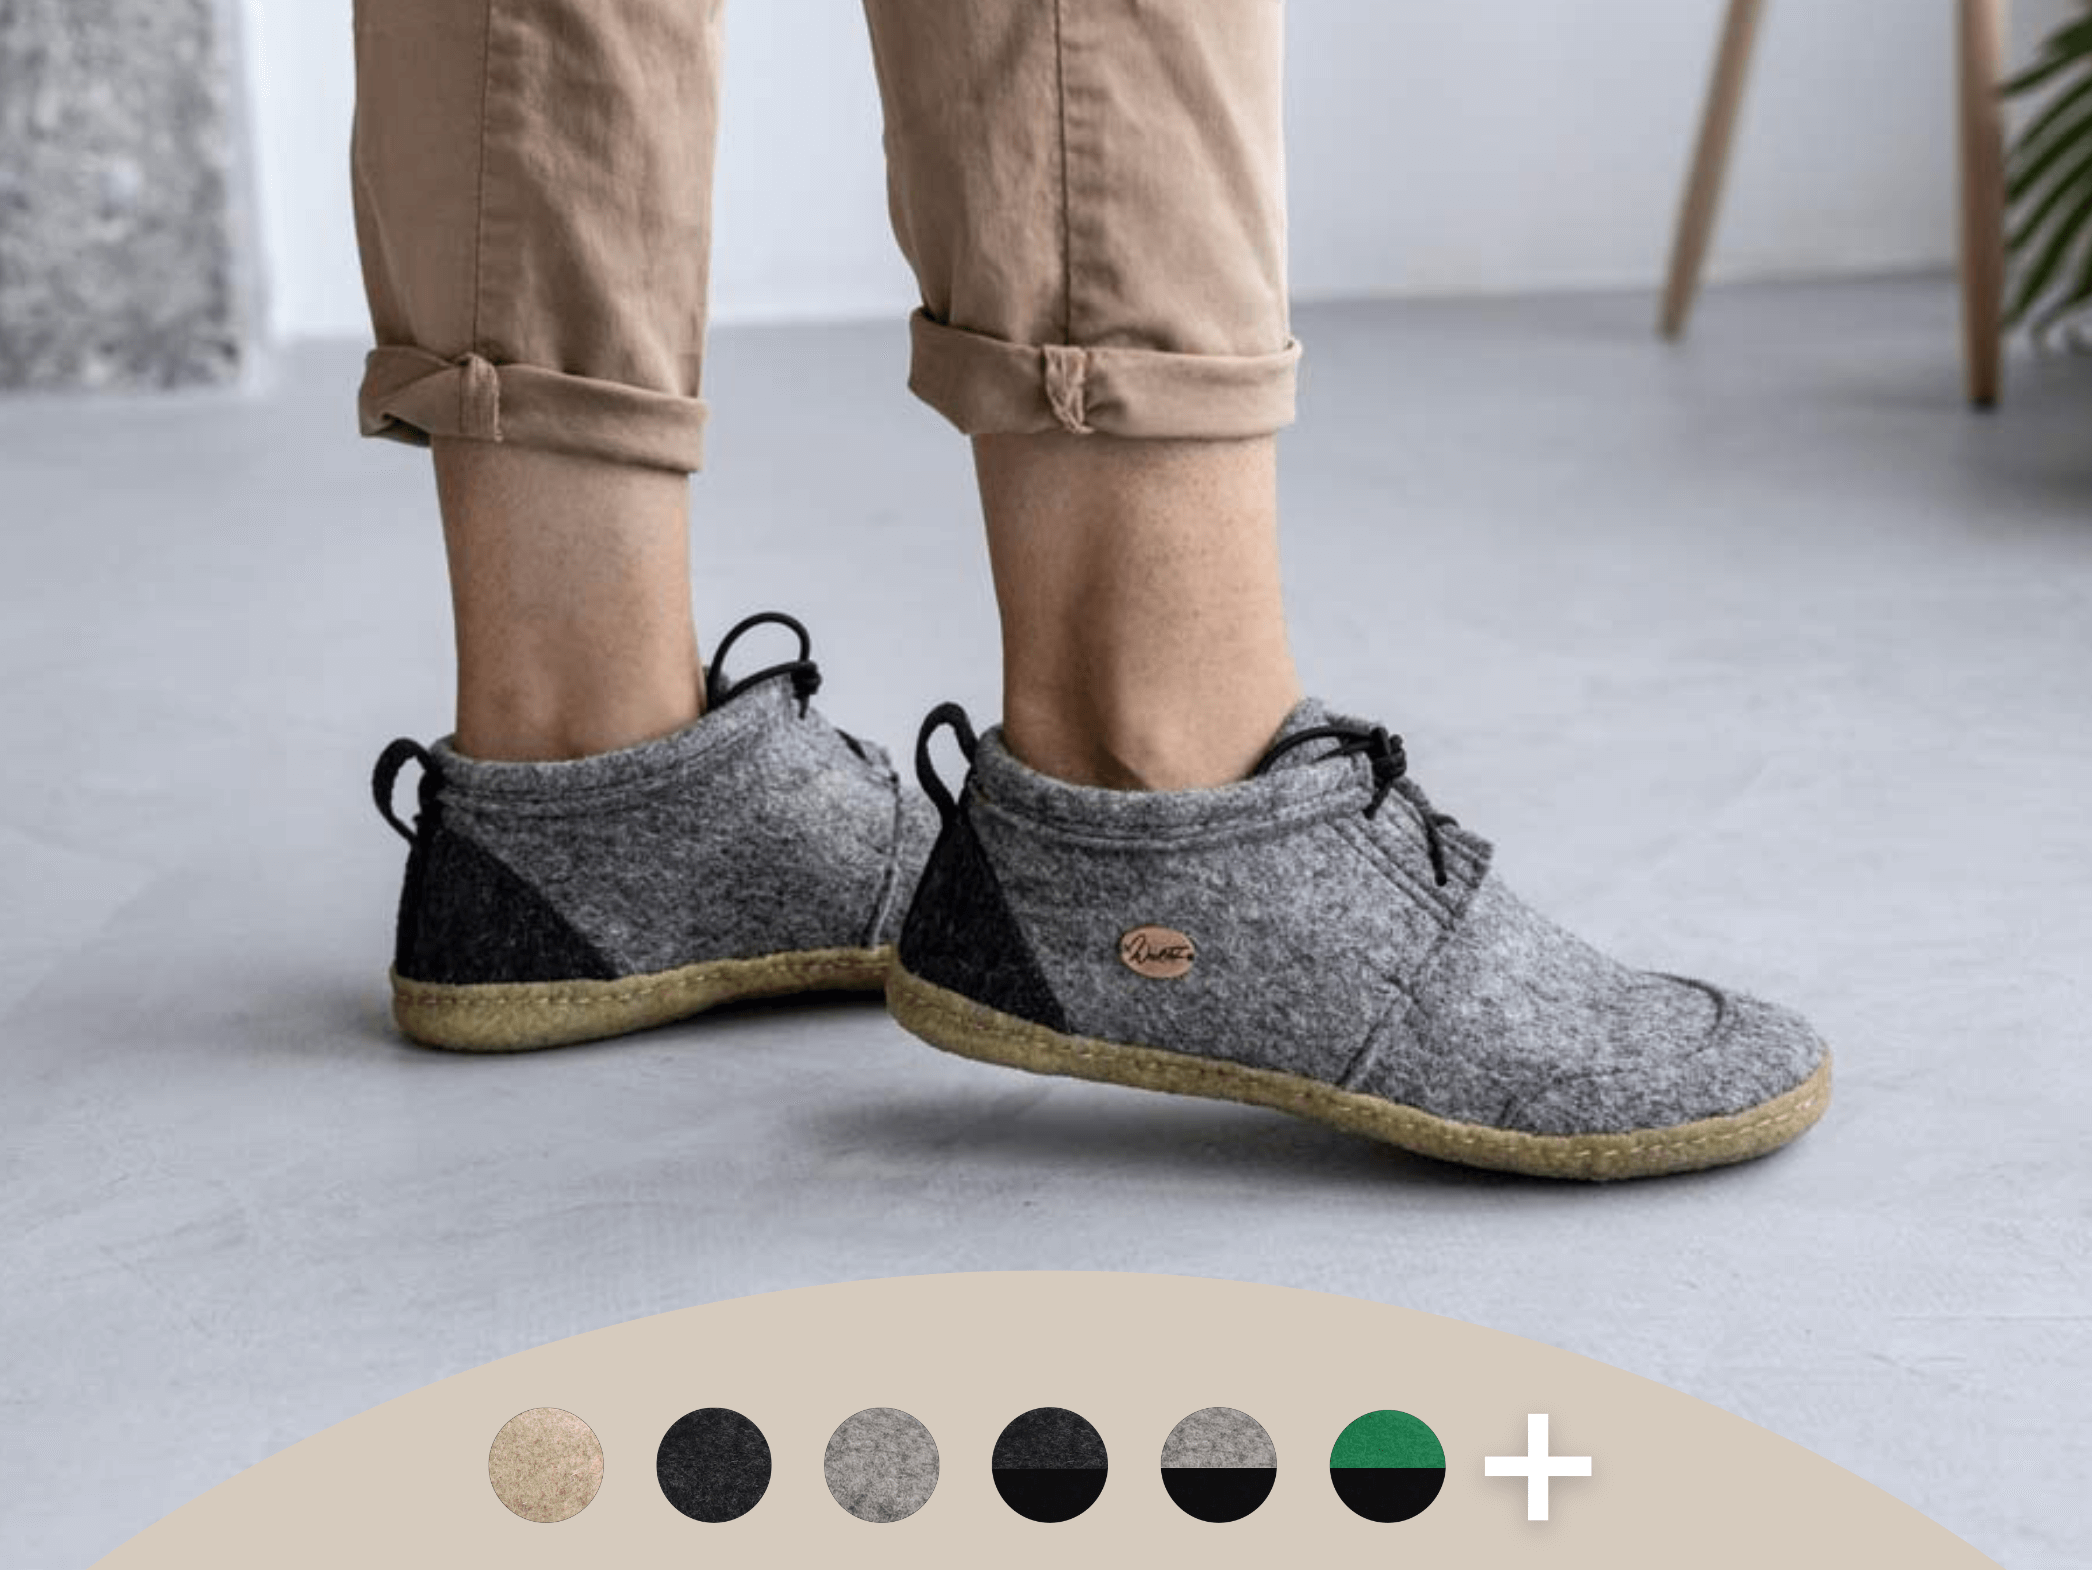 WoolFit Nomad | Barefoot Slippers with Zero-Drop Sole